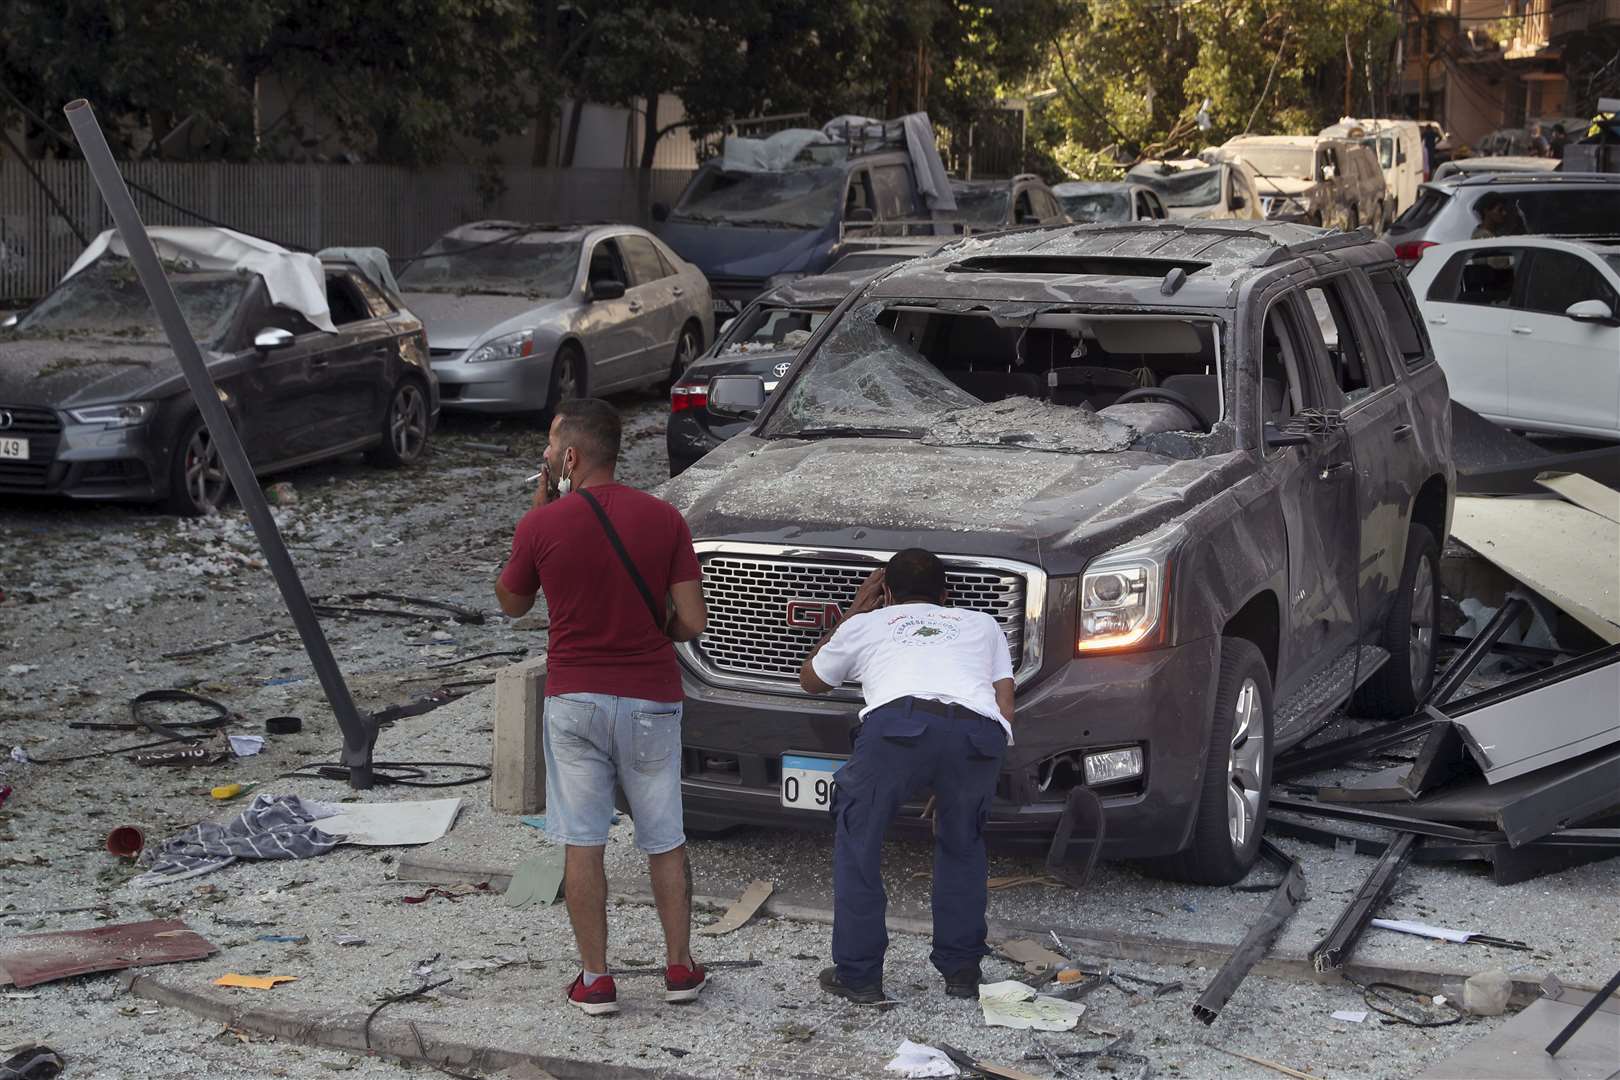 A man inspects his a damaged car after a massive explosion in Beirut (AP/Bilal Hussein)